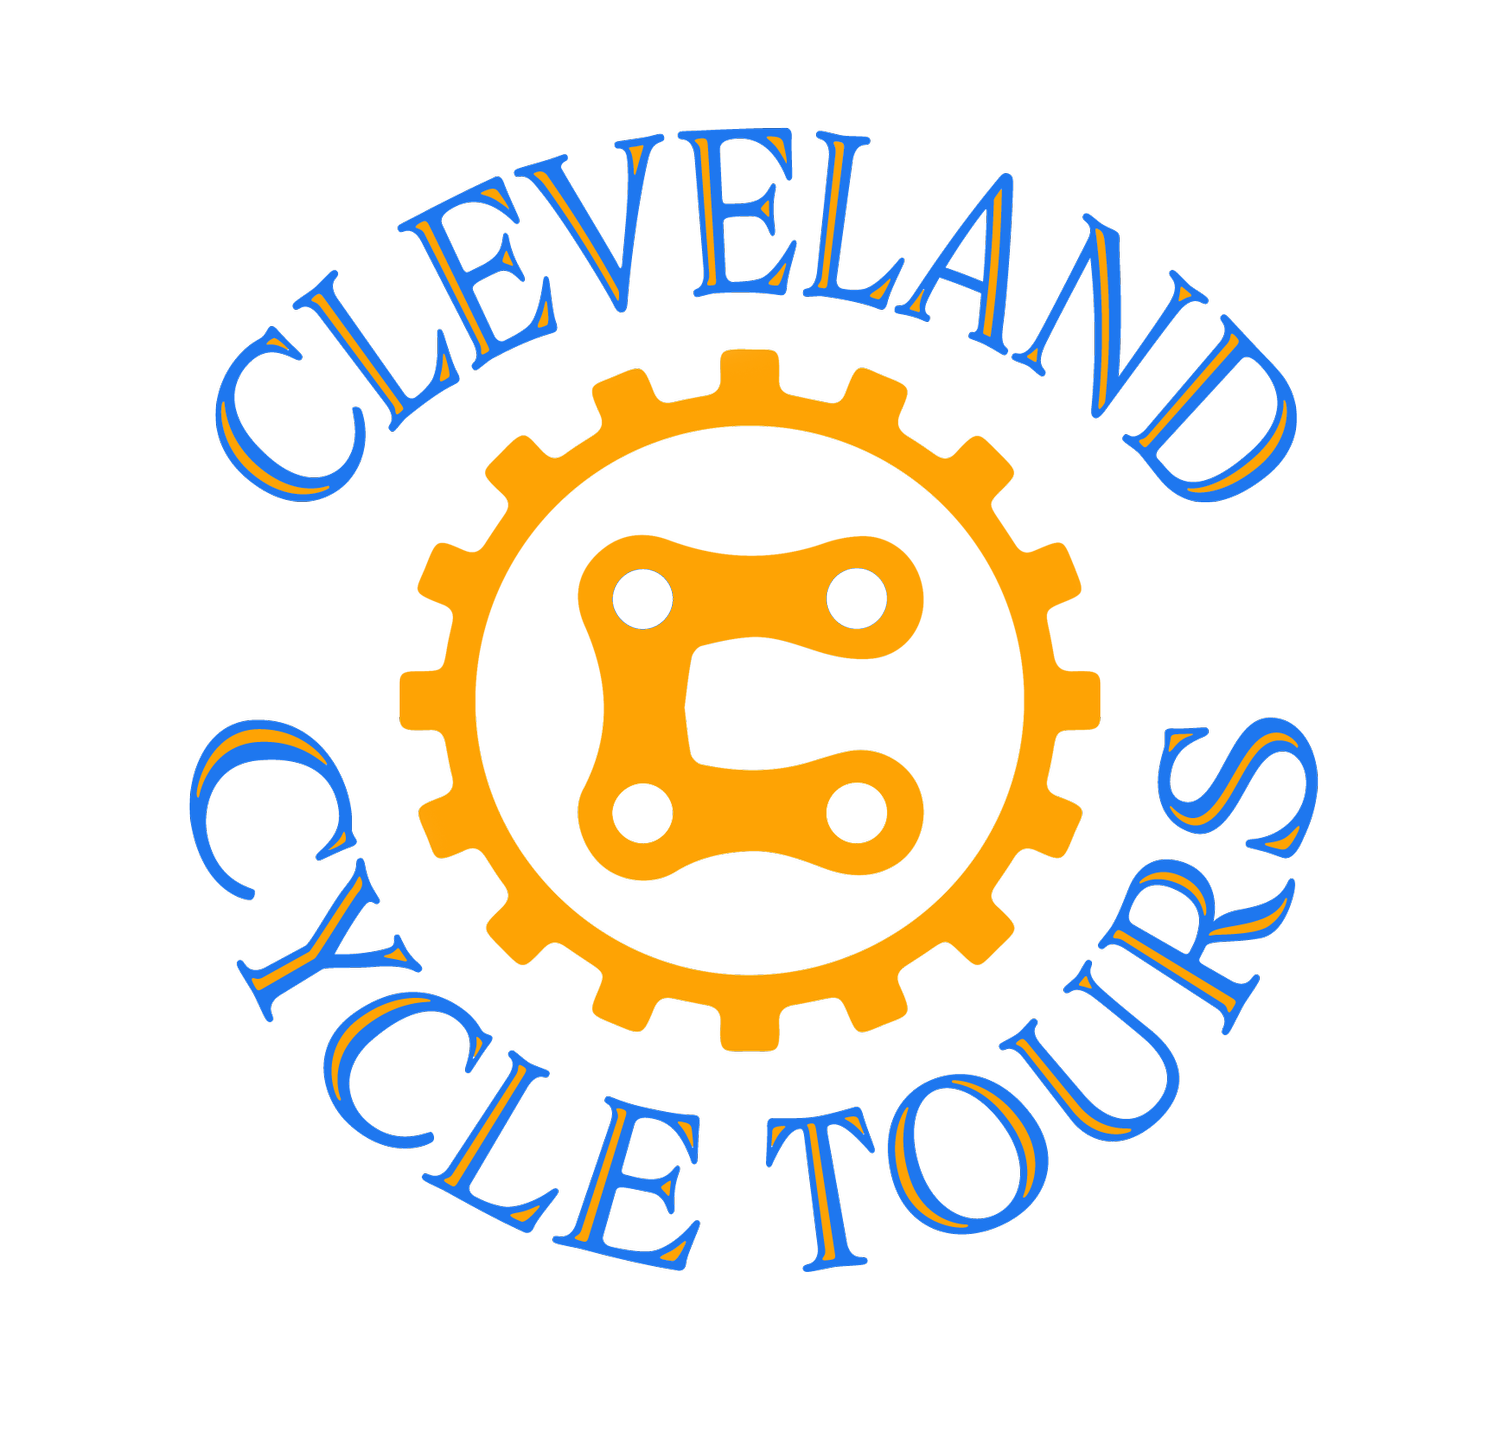 Cleveland Cycle Tours